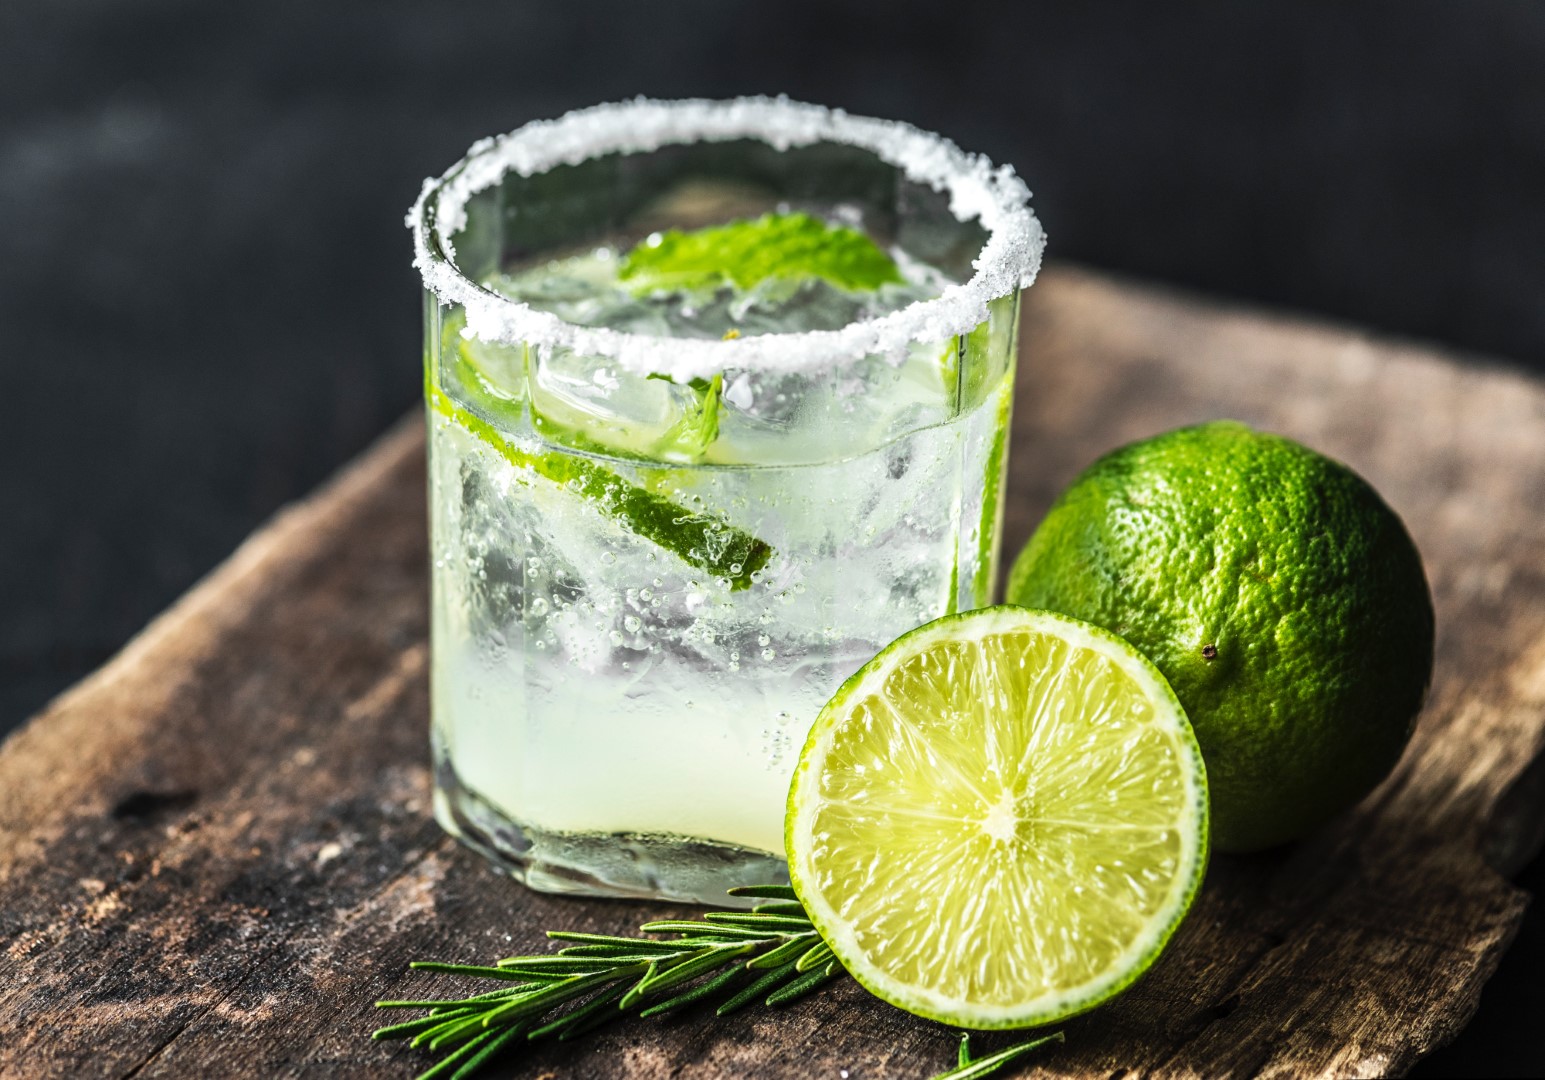 The mojito is a typical Cuban cocktail